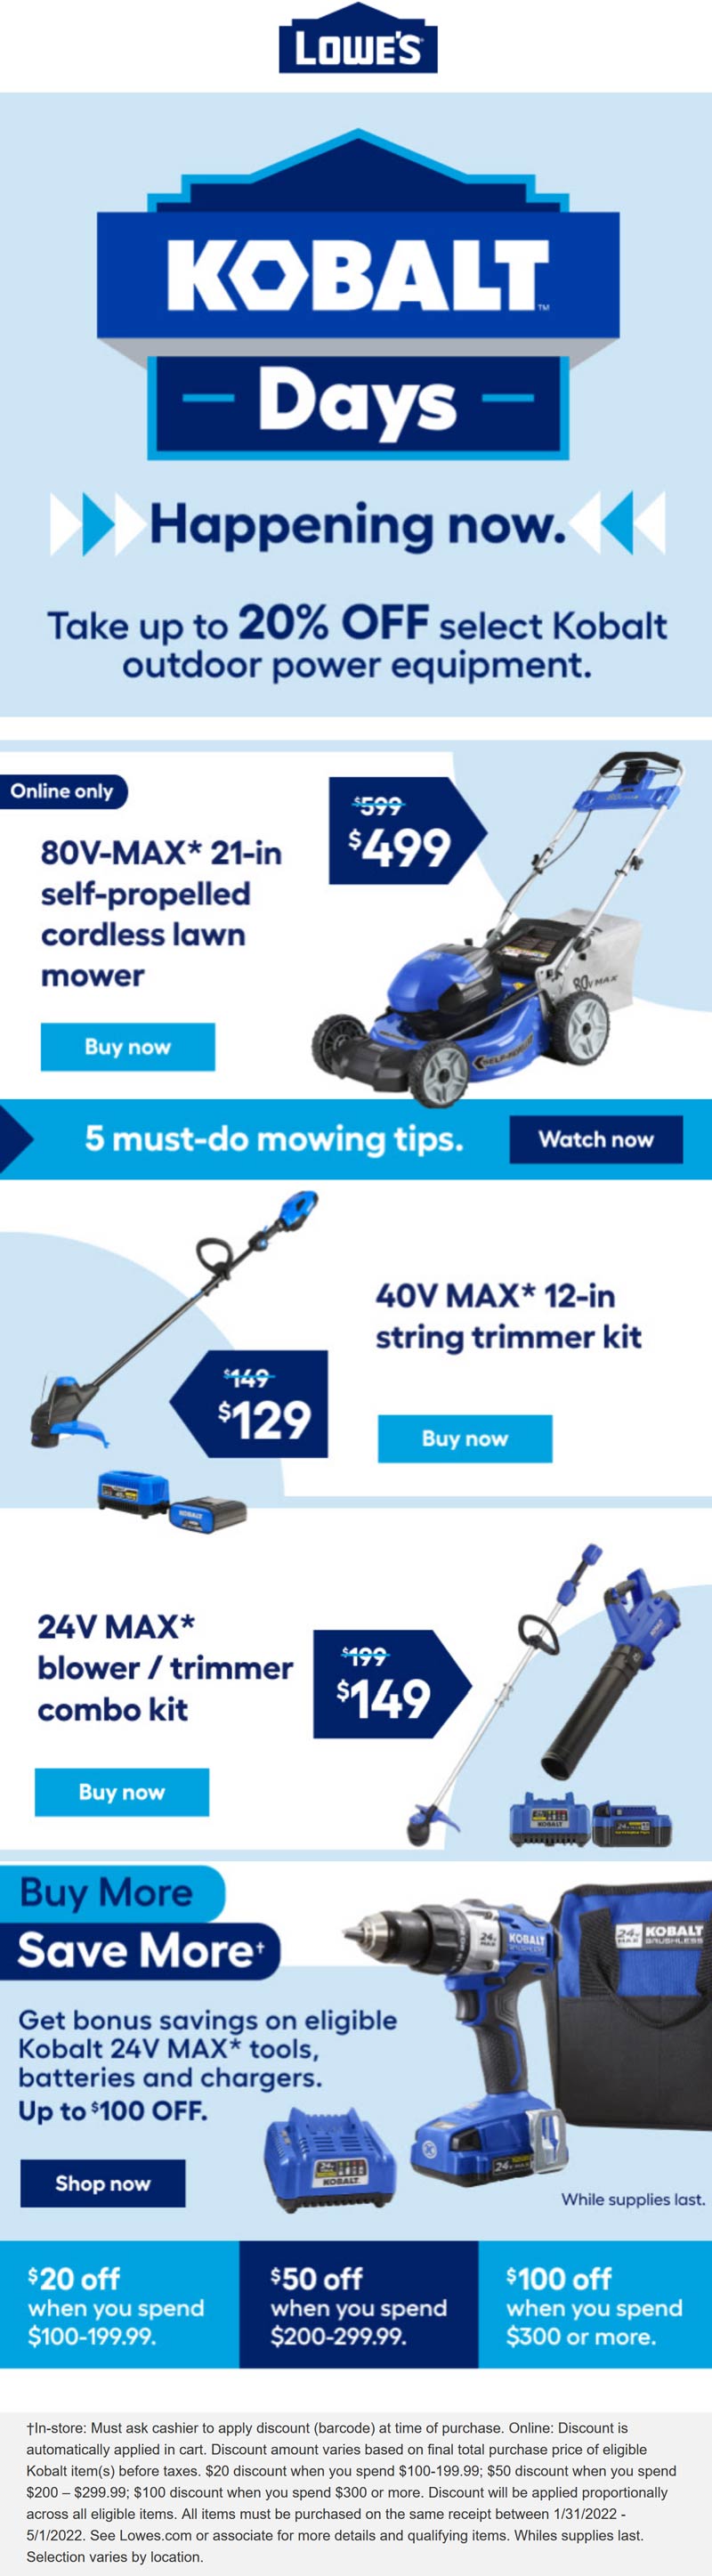 Lowes stores Coupon  $20-$100 off $100+ on Kobalt tools at Lowes #lowes 